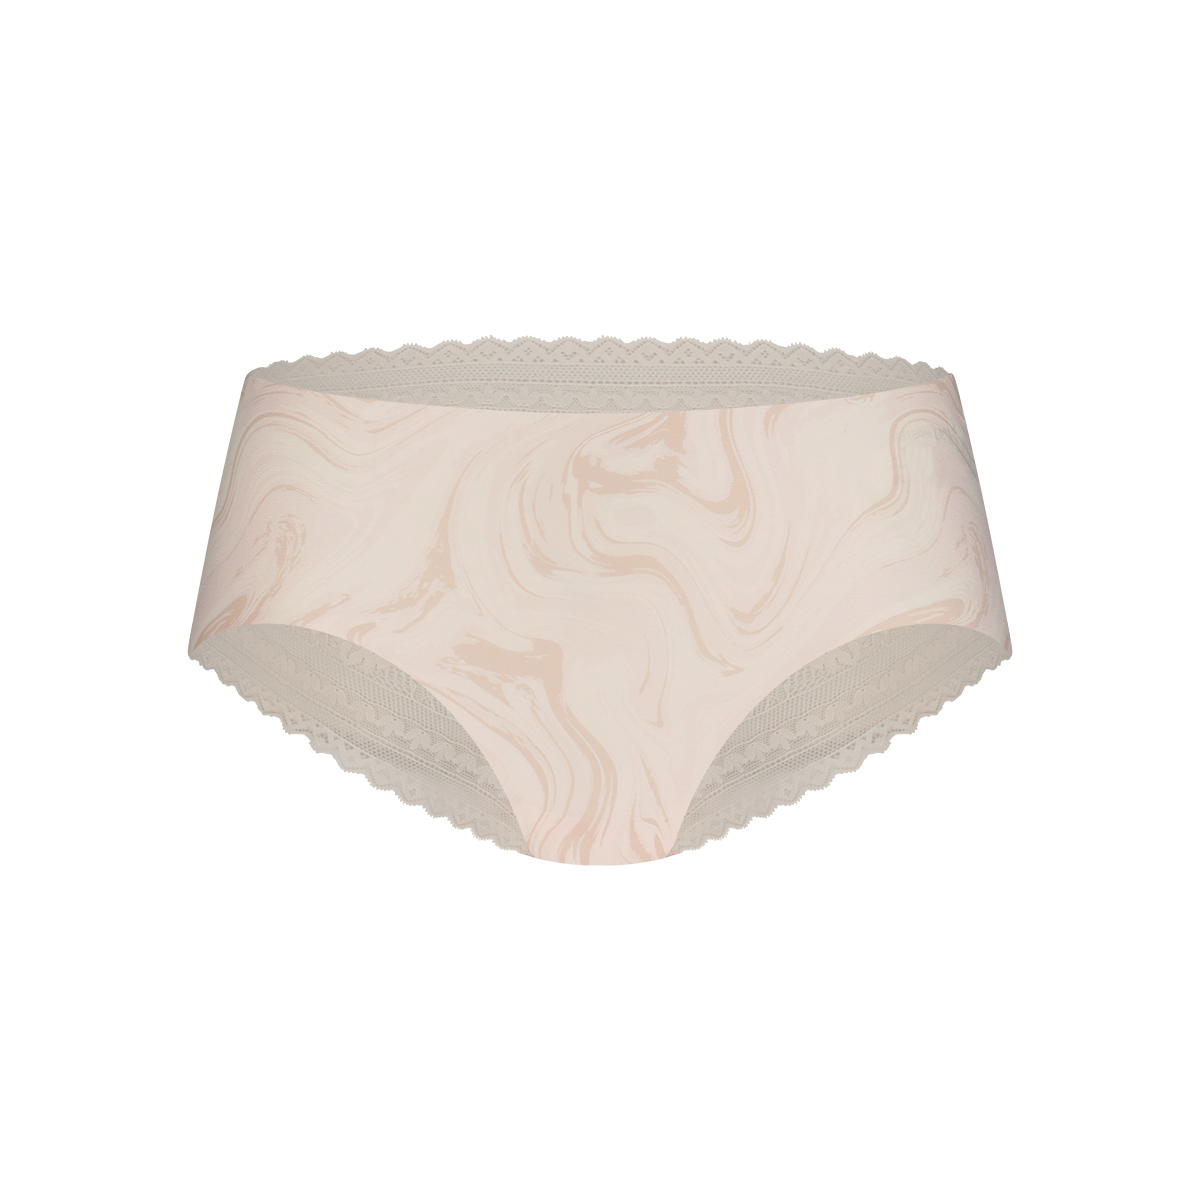 hipster met kant swirle soft pink